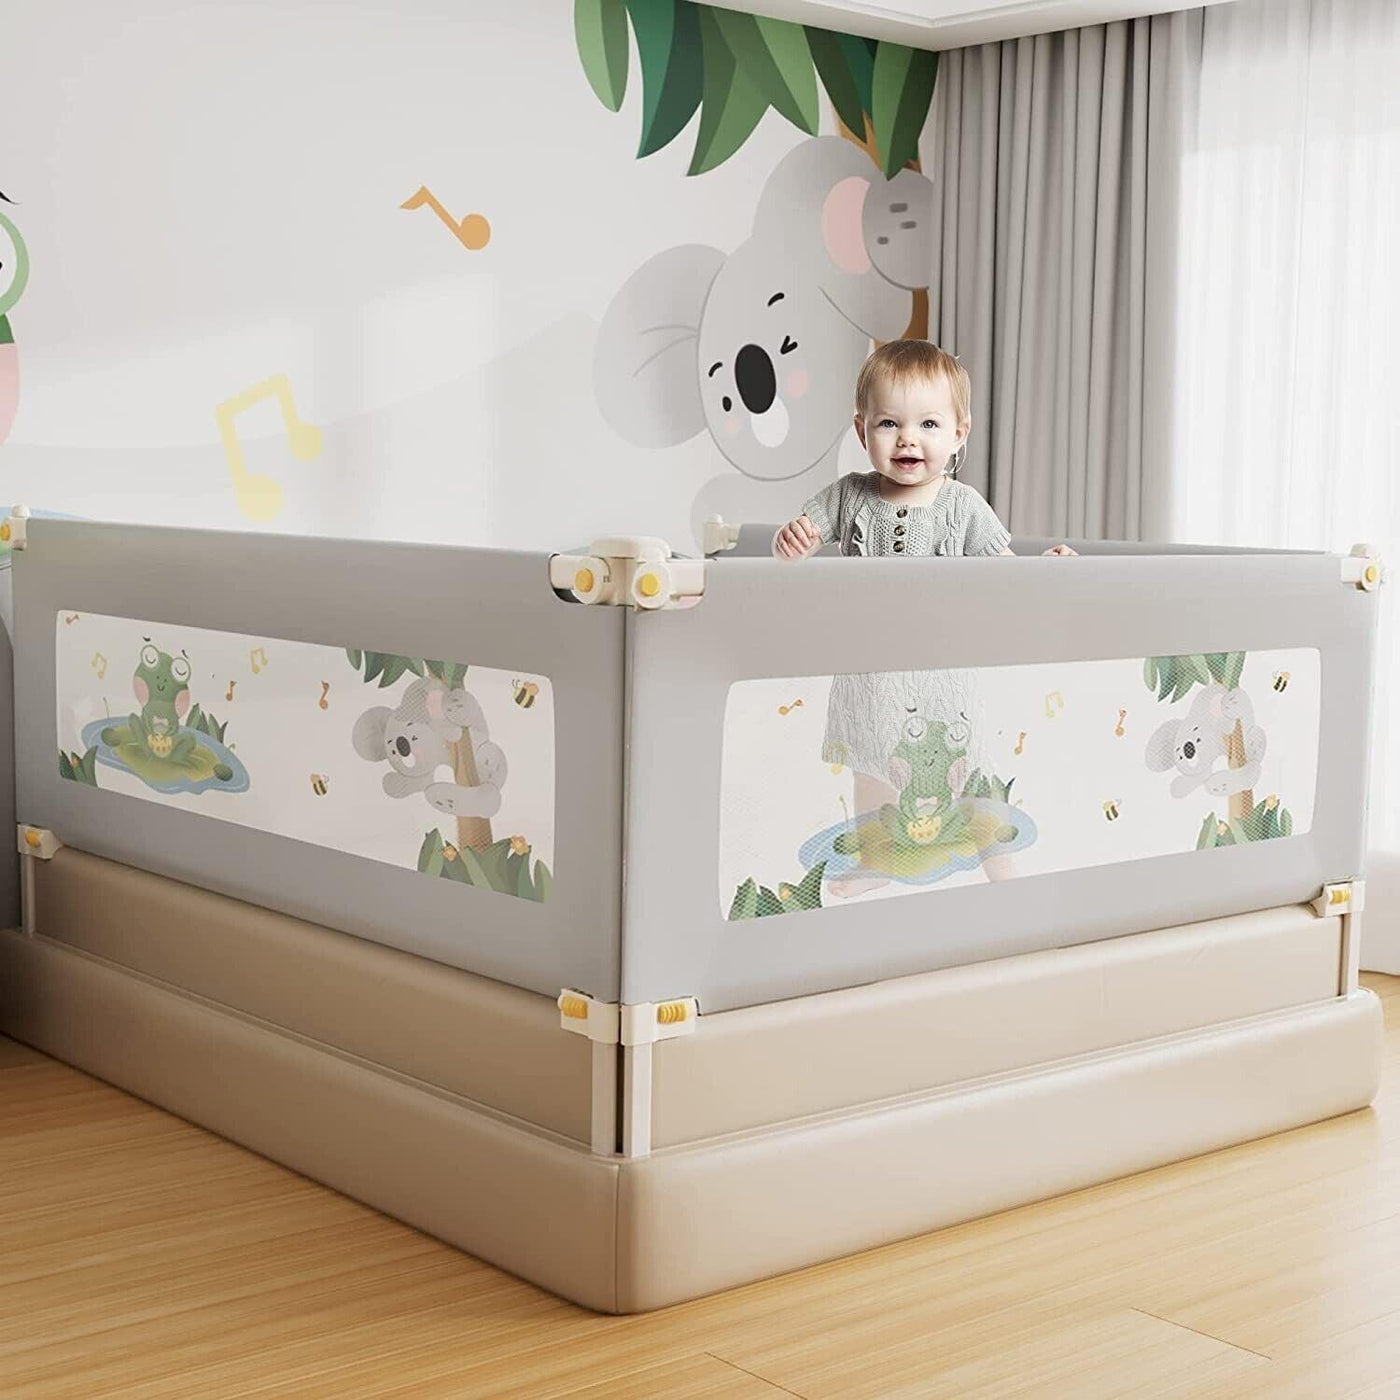 Baby Bed Guard For Toddlers 1pc, 200cm Bed Rail Free-Installation - Massive Discounts